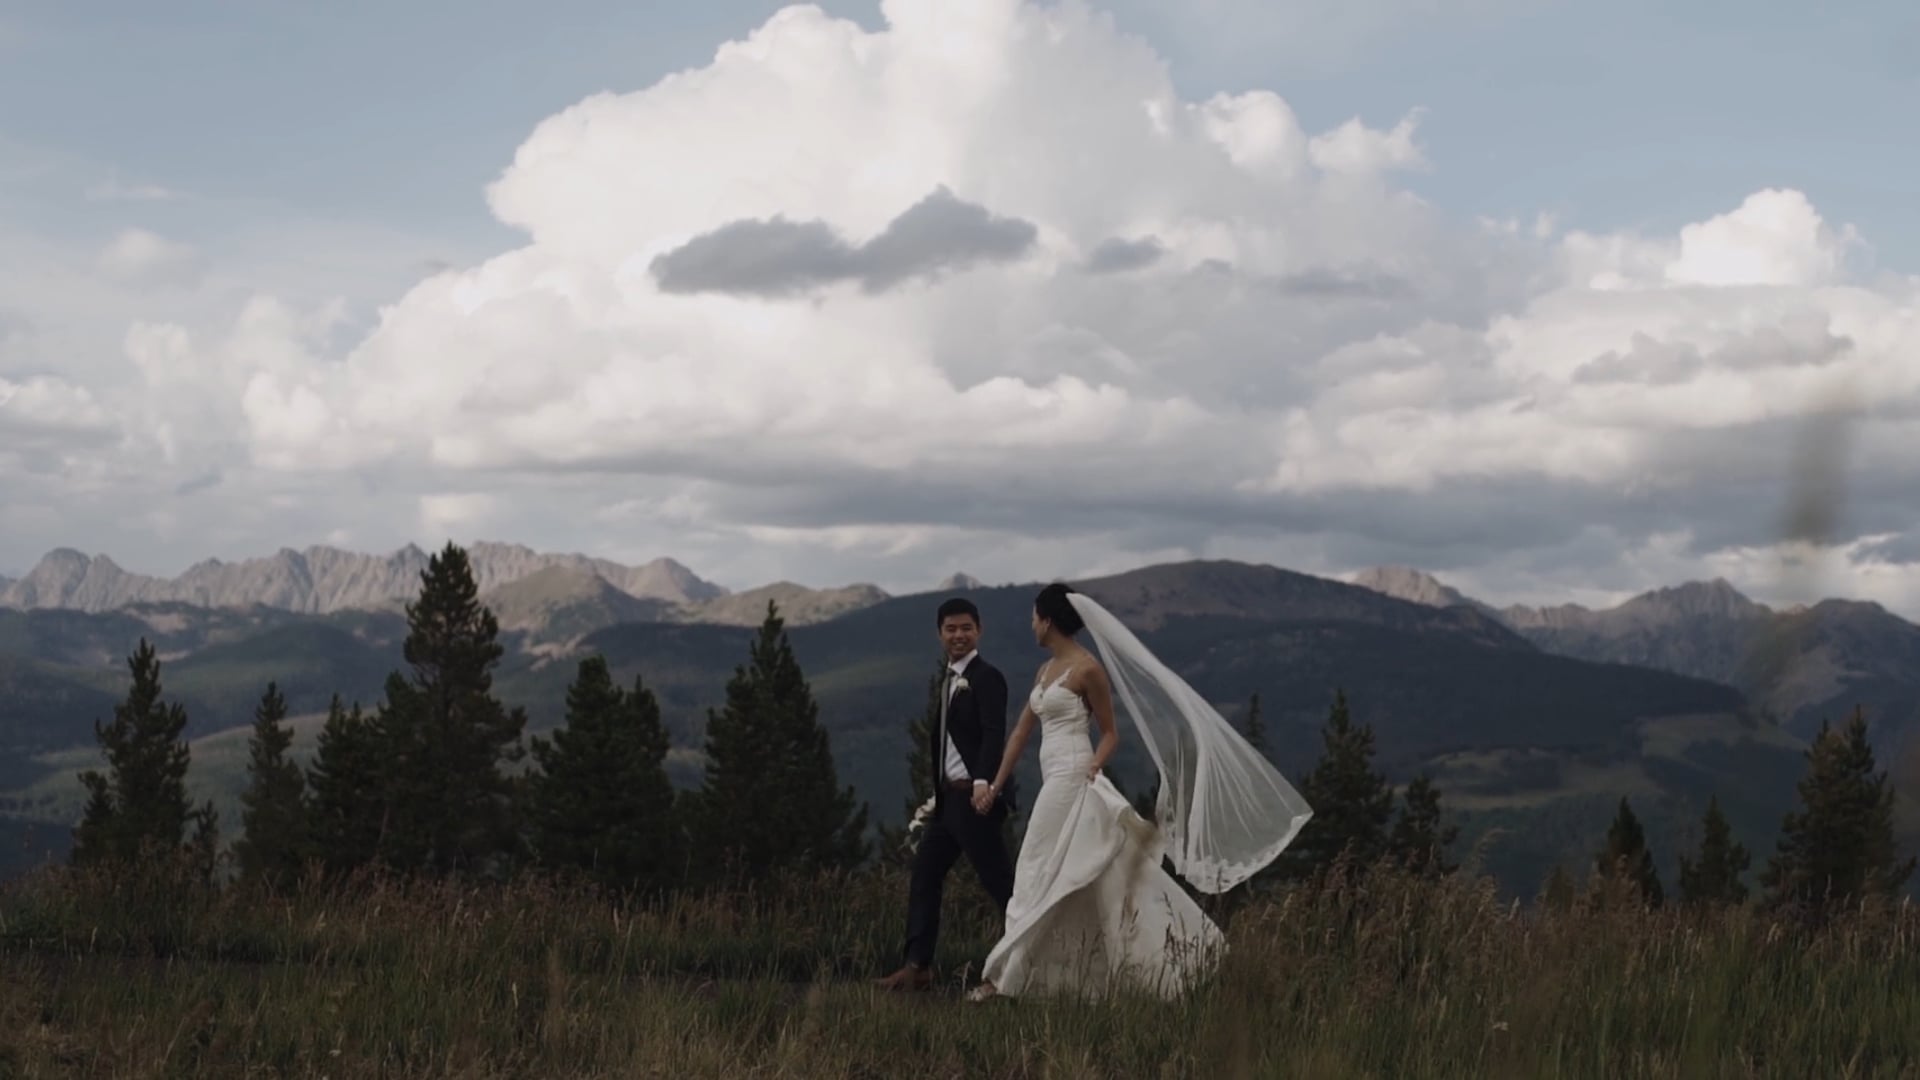 Tricia & Peter - The Highlight // Vail, CO